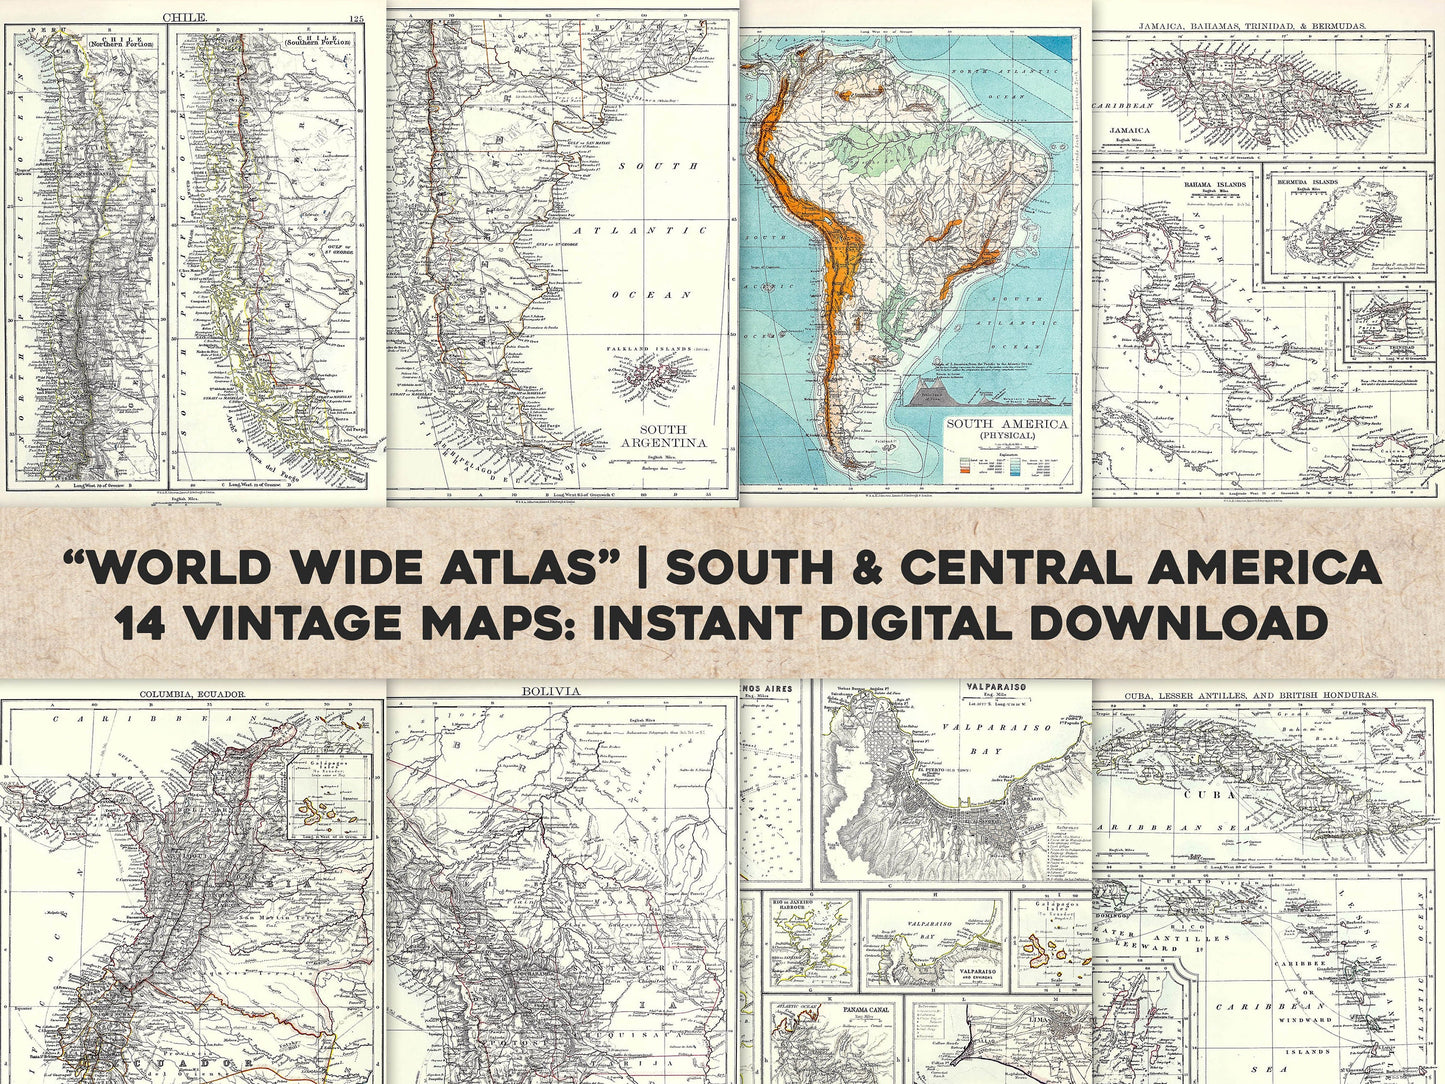 The World Wide Atlas of Modern Geography South & Central America [14 Images]